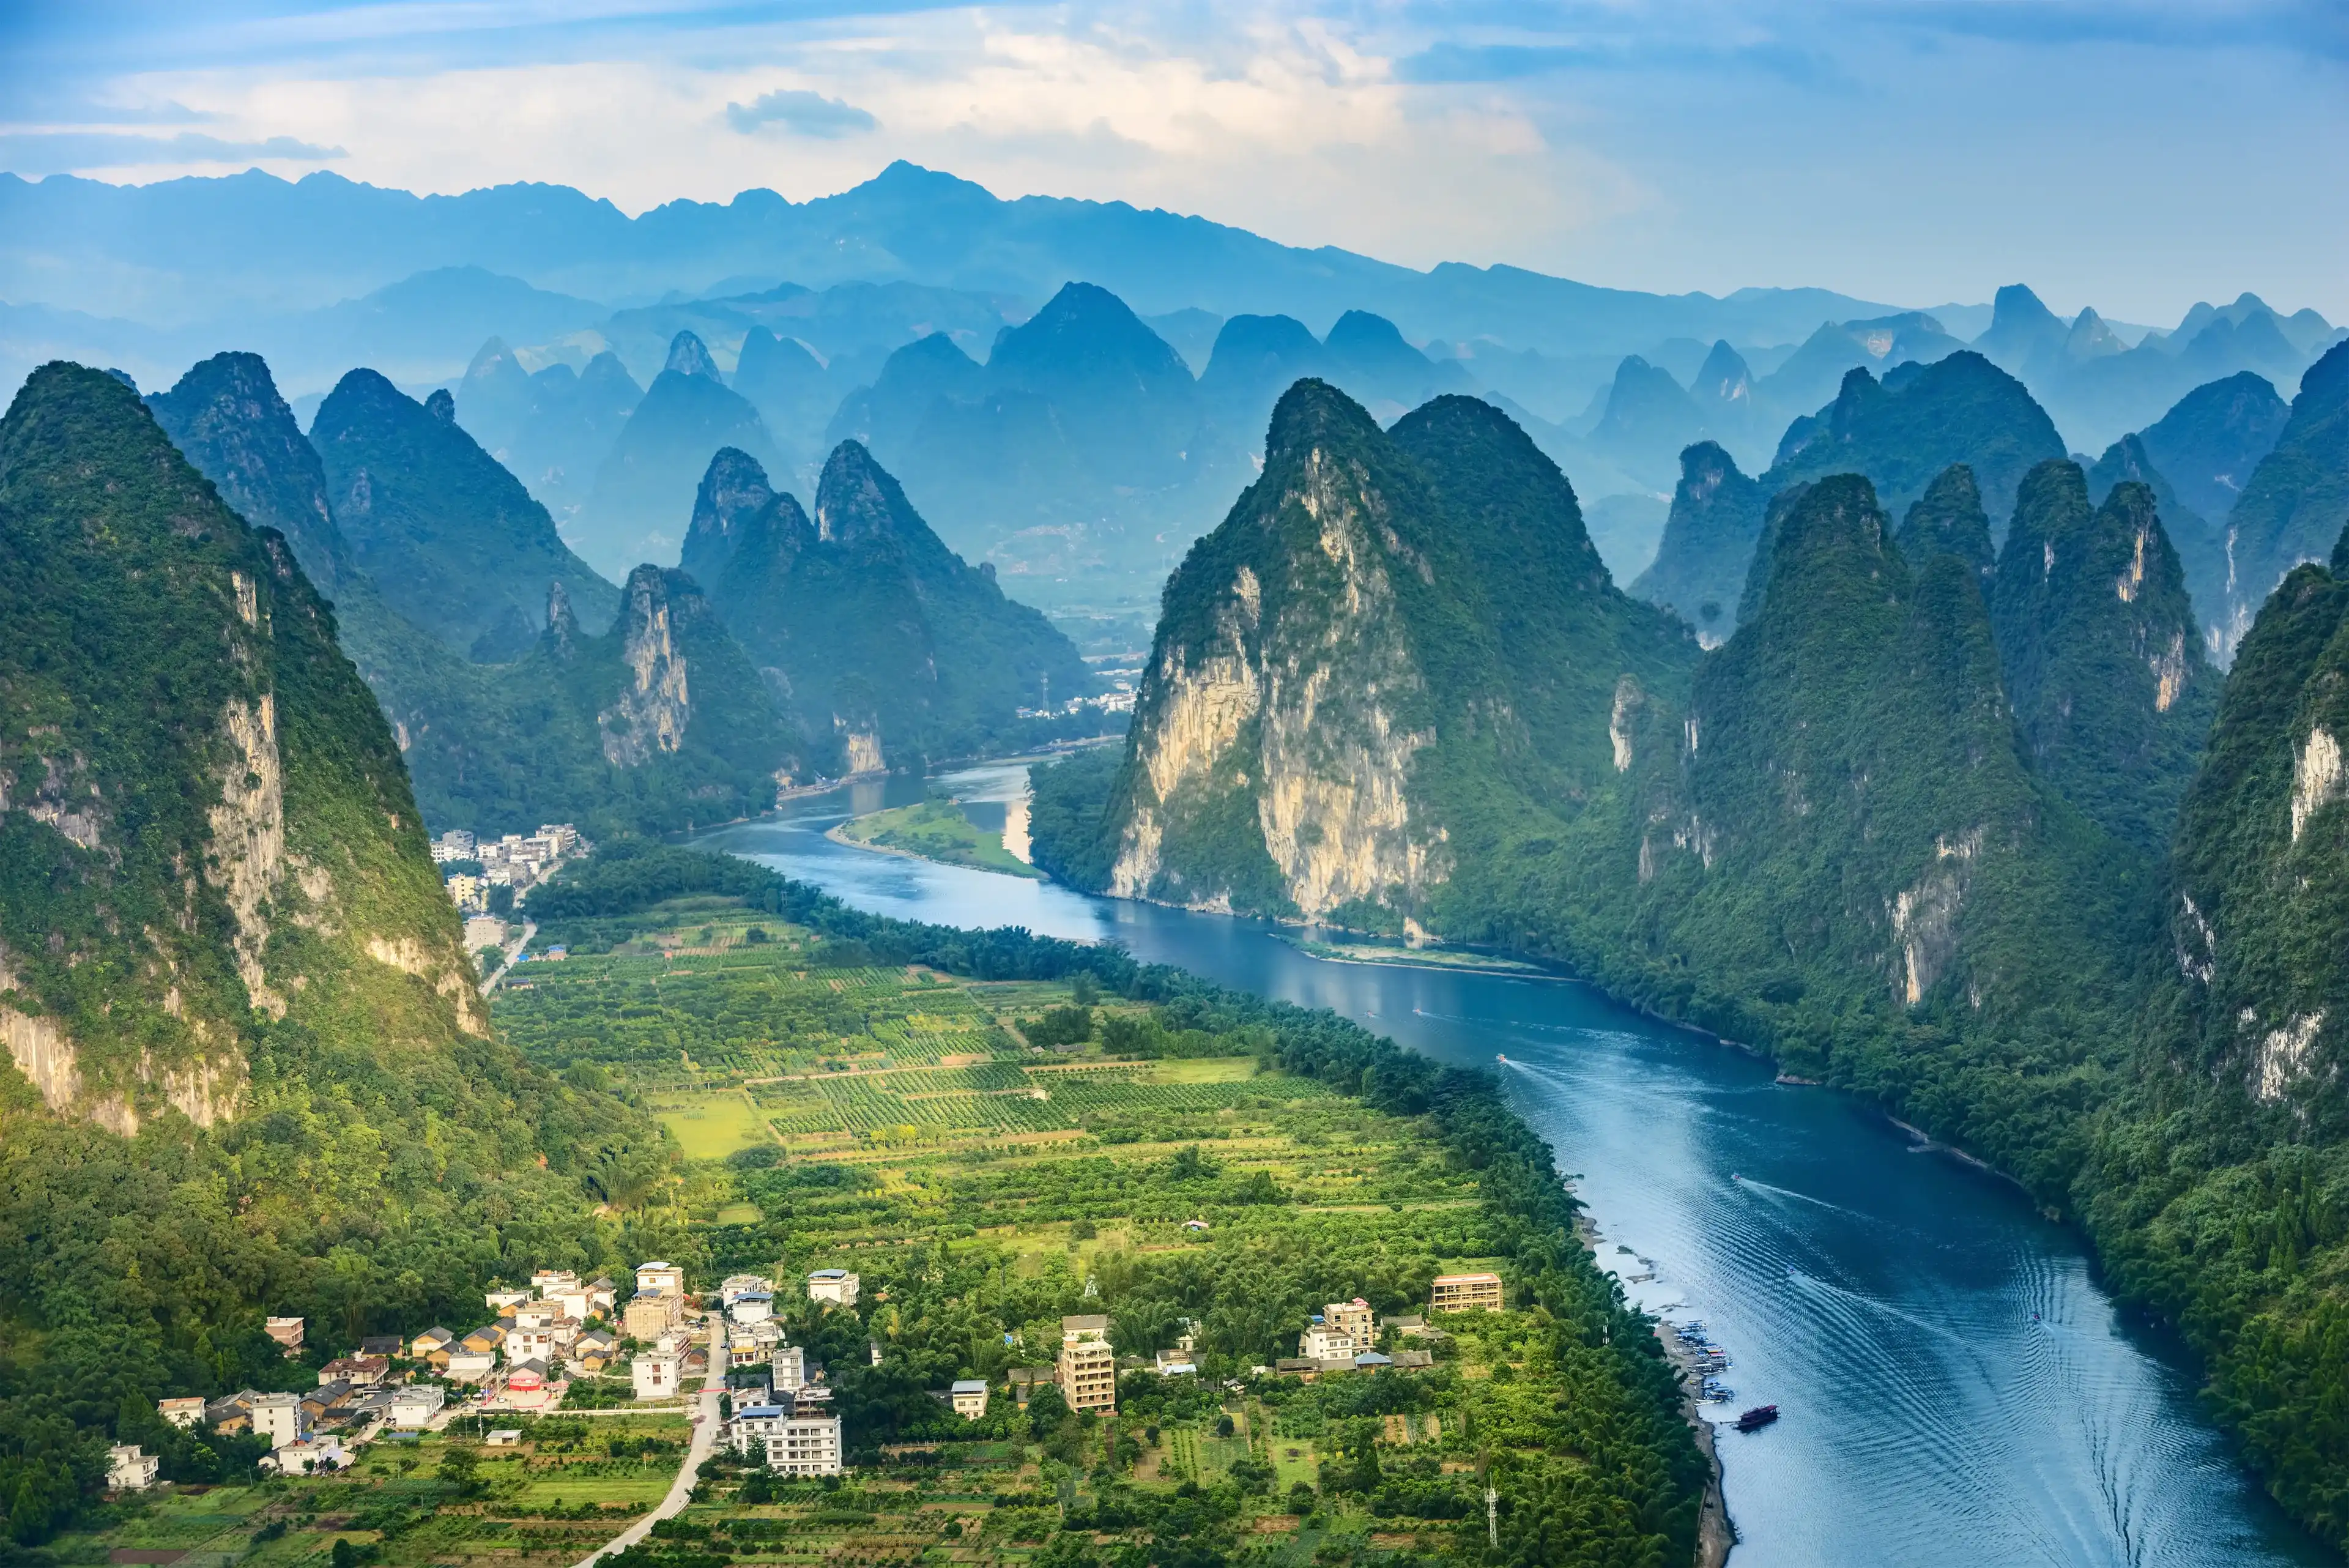 Landscape of Guilin, Li River and Karst mountains. Located near The Ancient Town of Xingping, Yangshuo County, Guangxi Province, China.